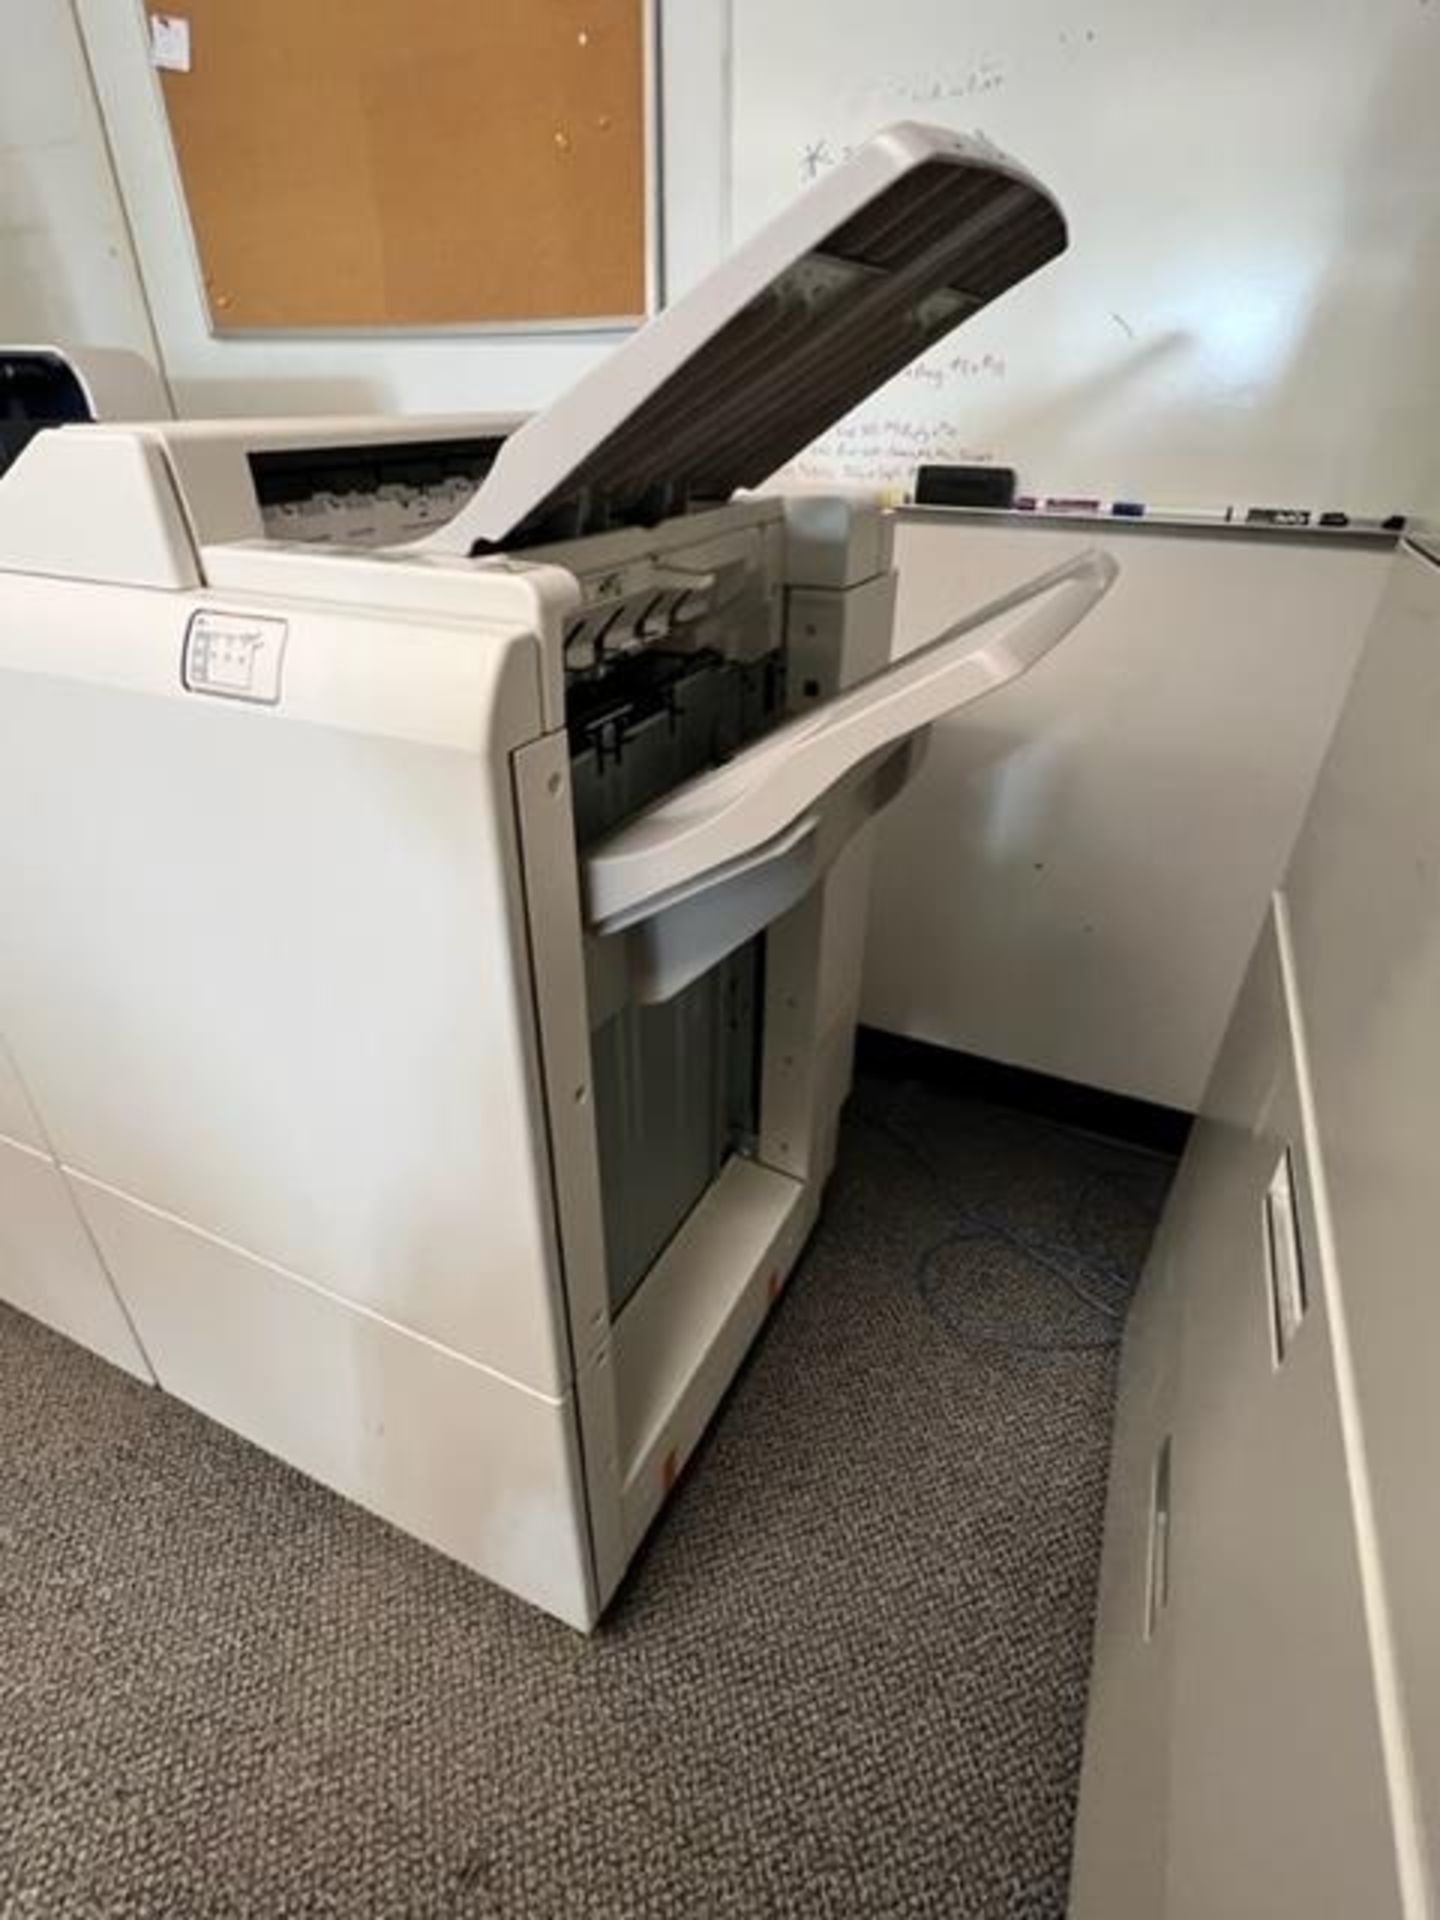 2021 XEROX PRIMELINK C9065 MFP 4-COLOR PRODUCTION PRINTER PRESS, W/ OPTIONAL FIERY RIP - Image 9 of 19